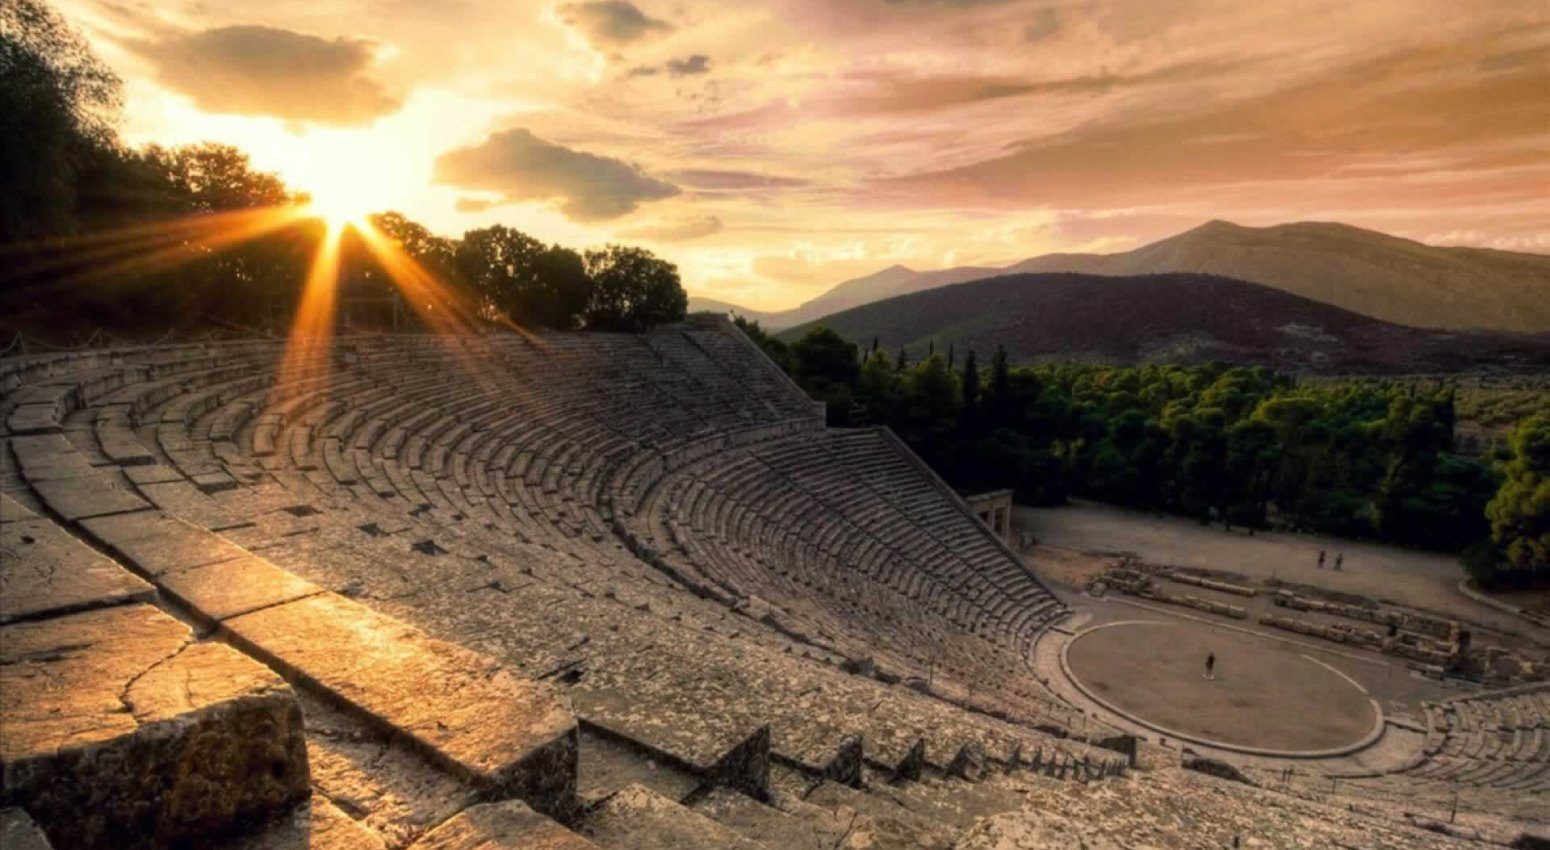 The ancient theater of Epidaurus in Greece.